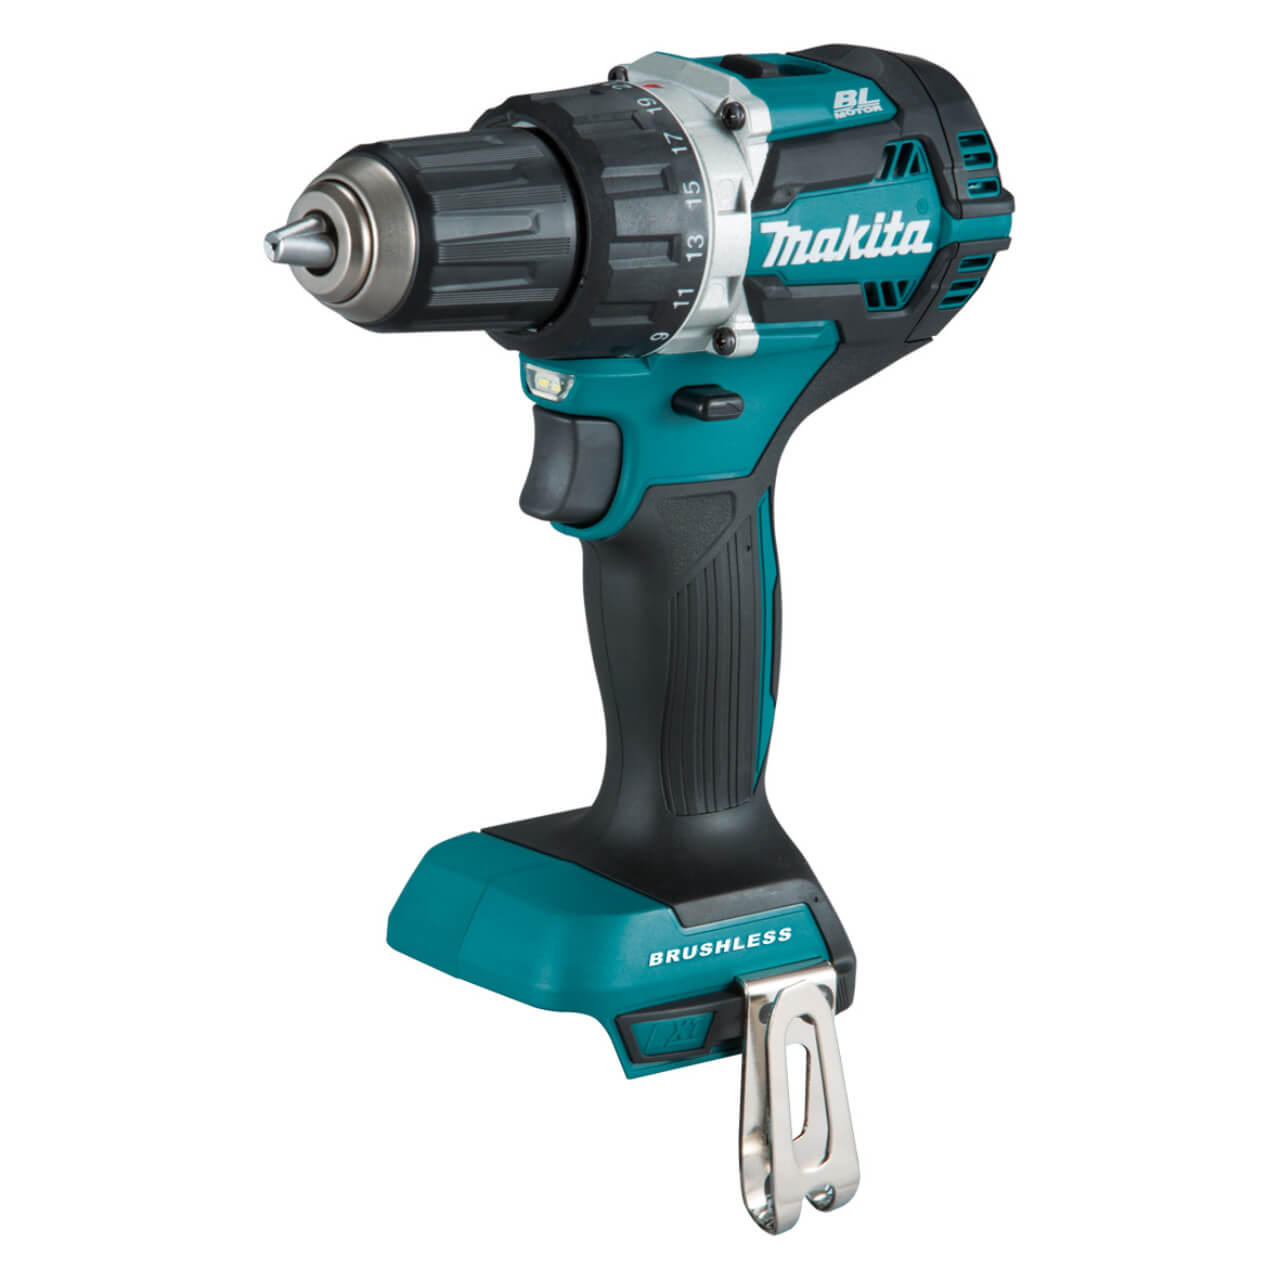 Makita 18V COMPACT BRUSHLESS Heavy Duty Driver Drill Kit - Includes 2 x 3.0Ah Batteries. Rapid Charger & Carry Case